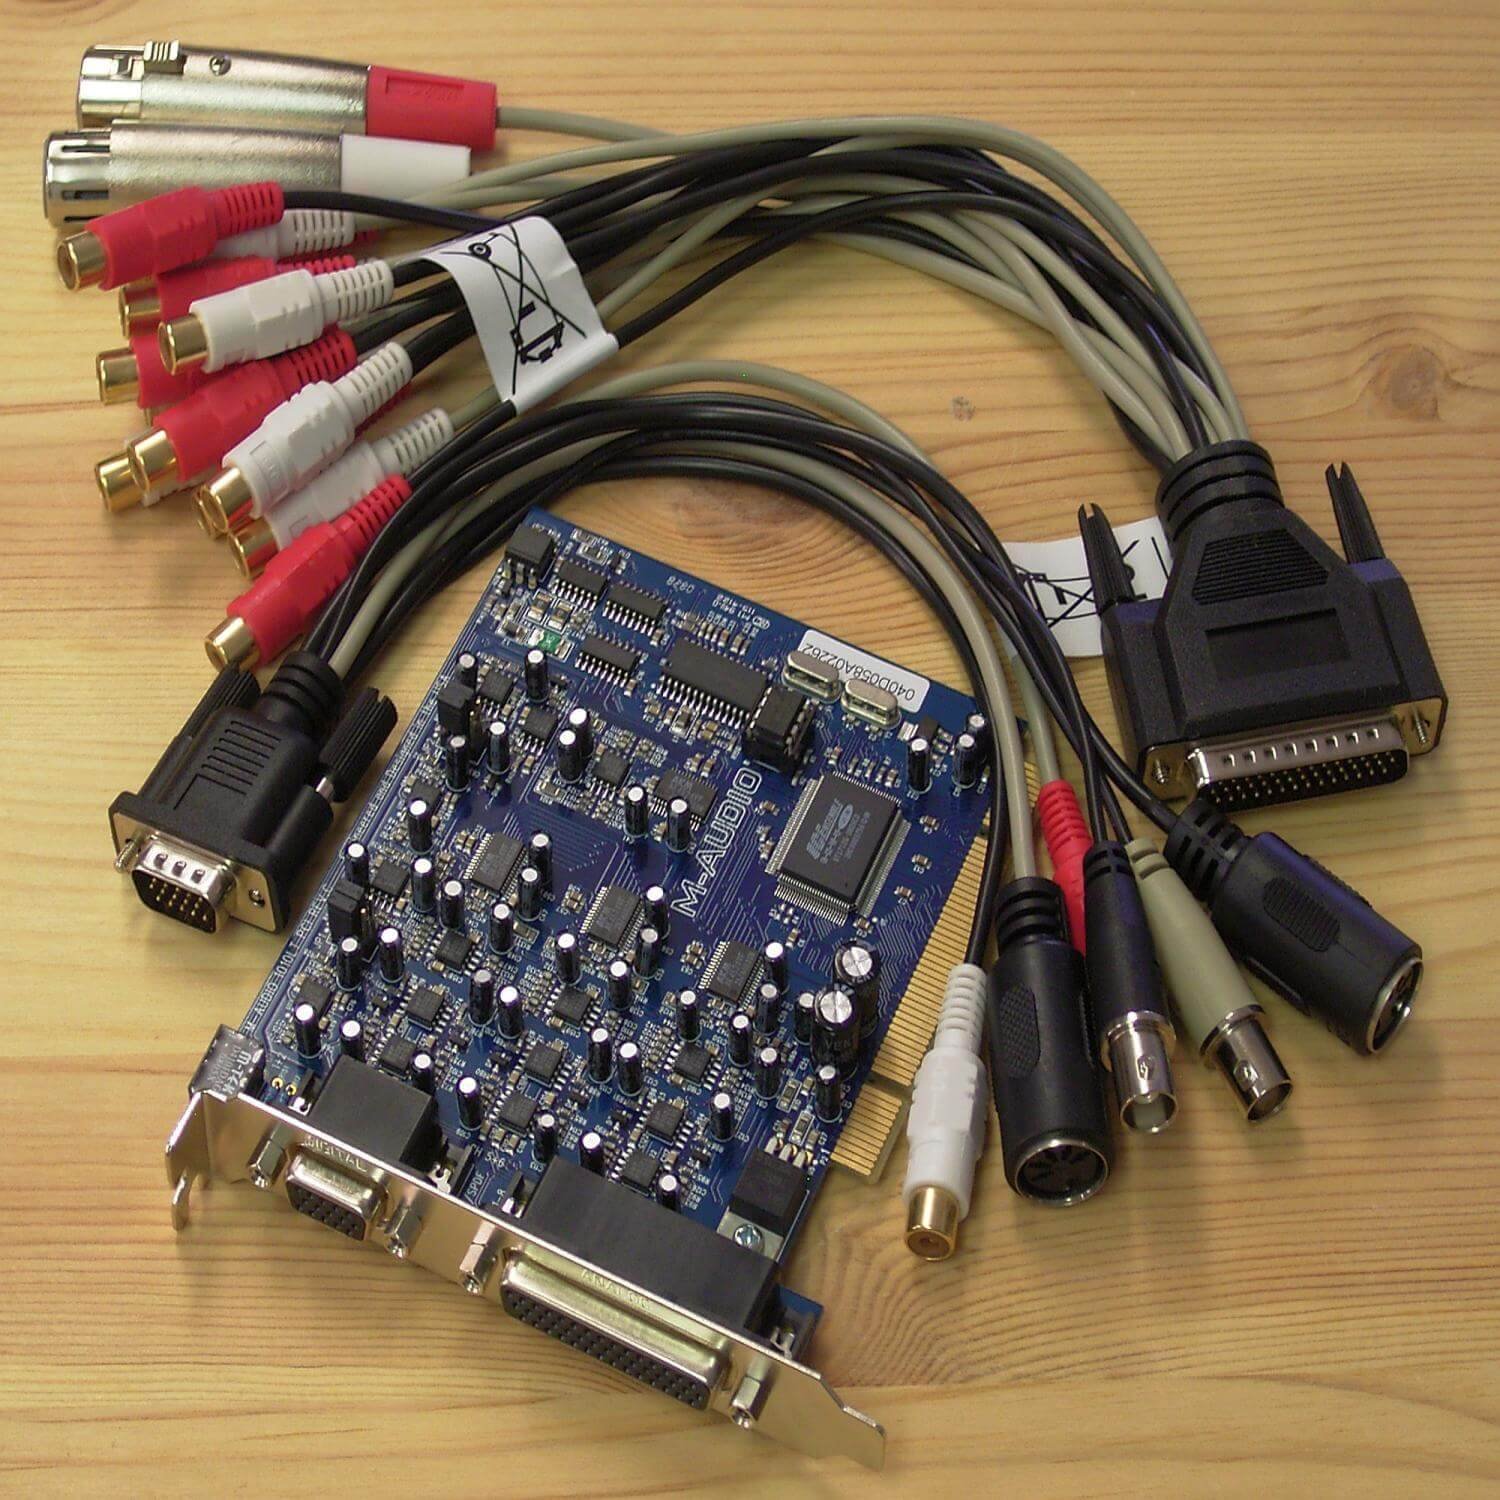 Computer PCI Cards, Cables & Modules